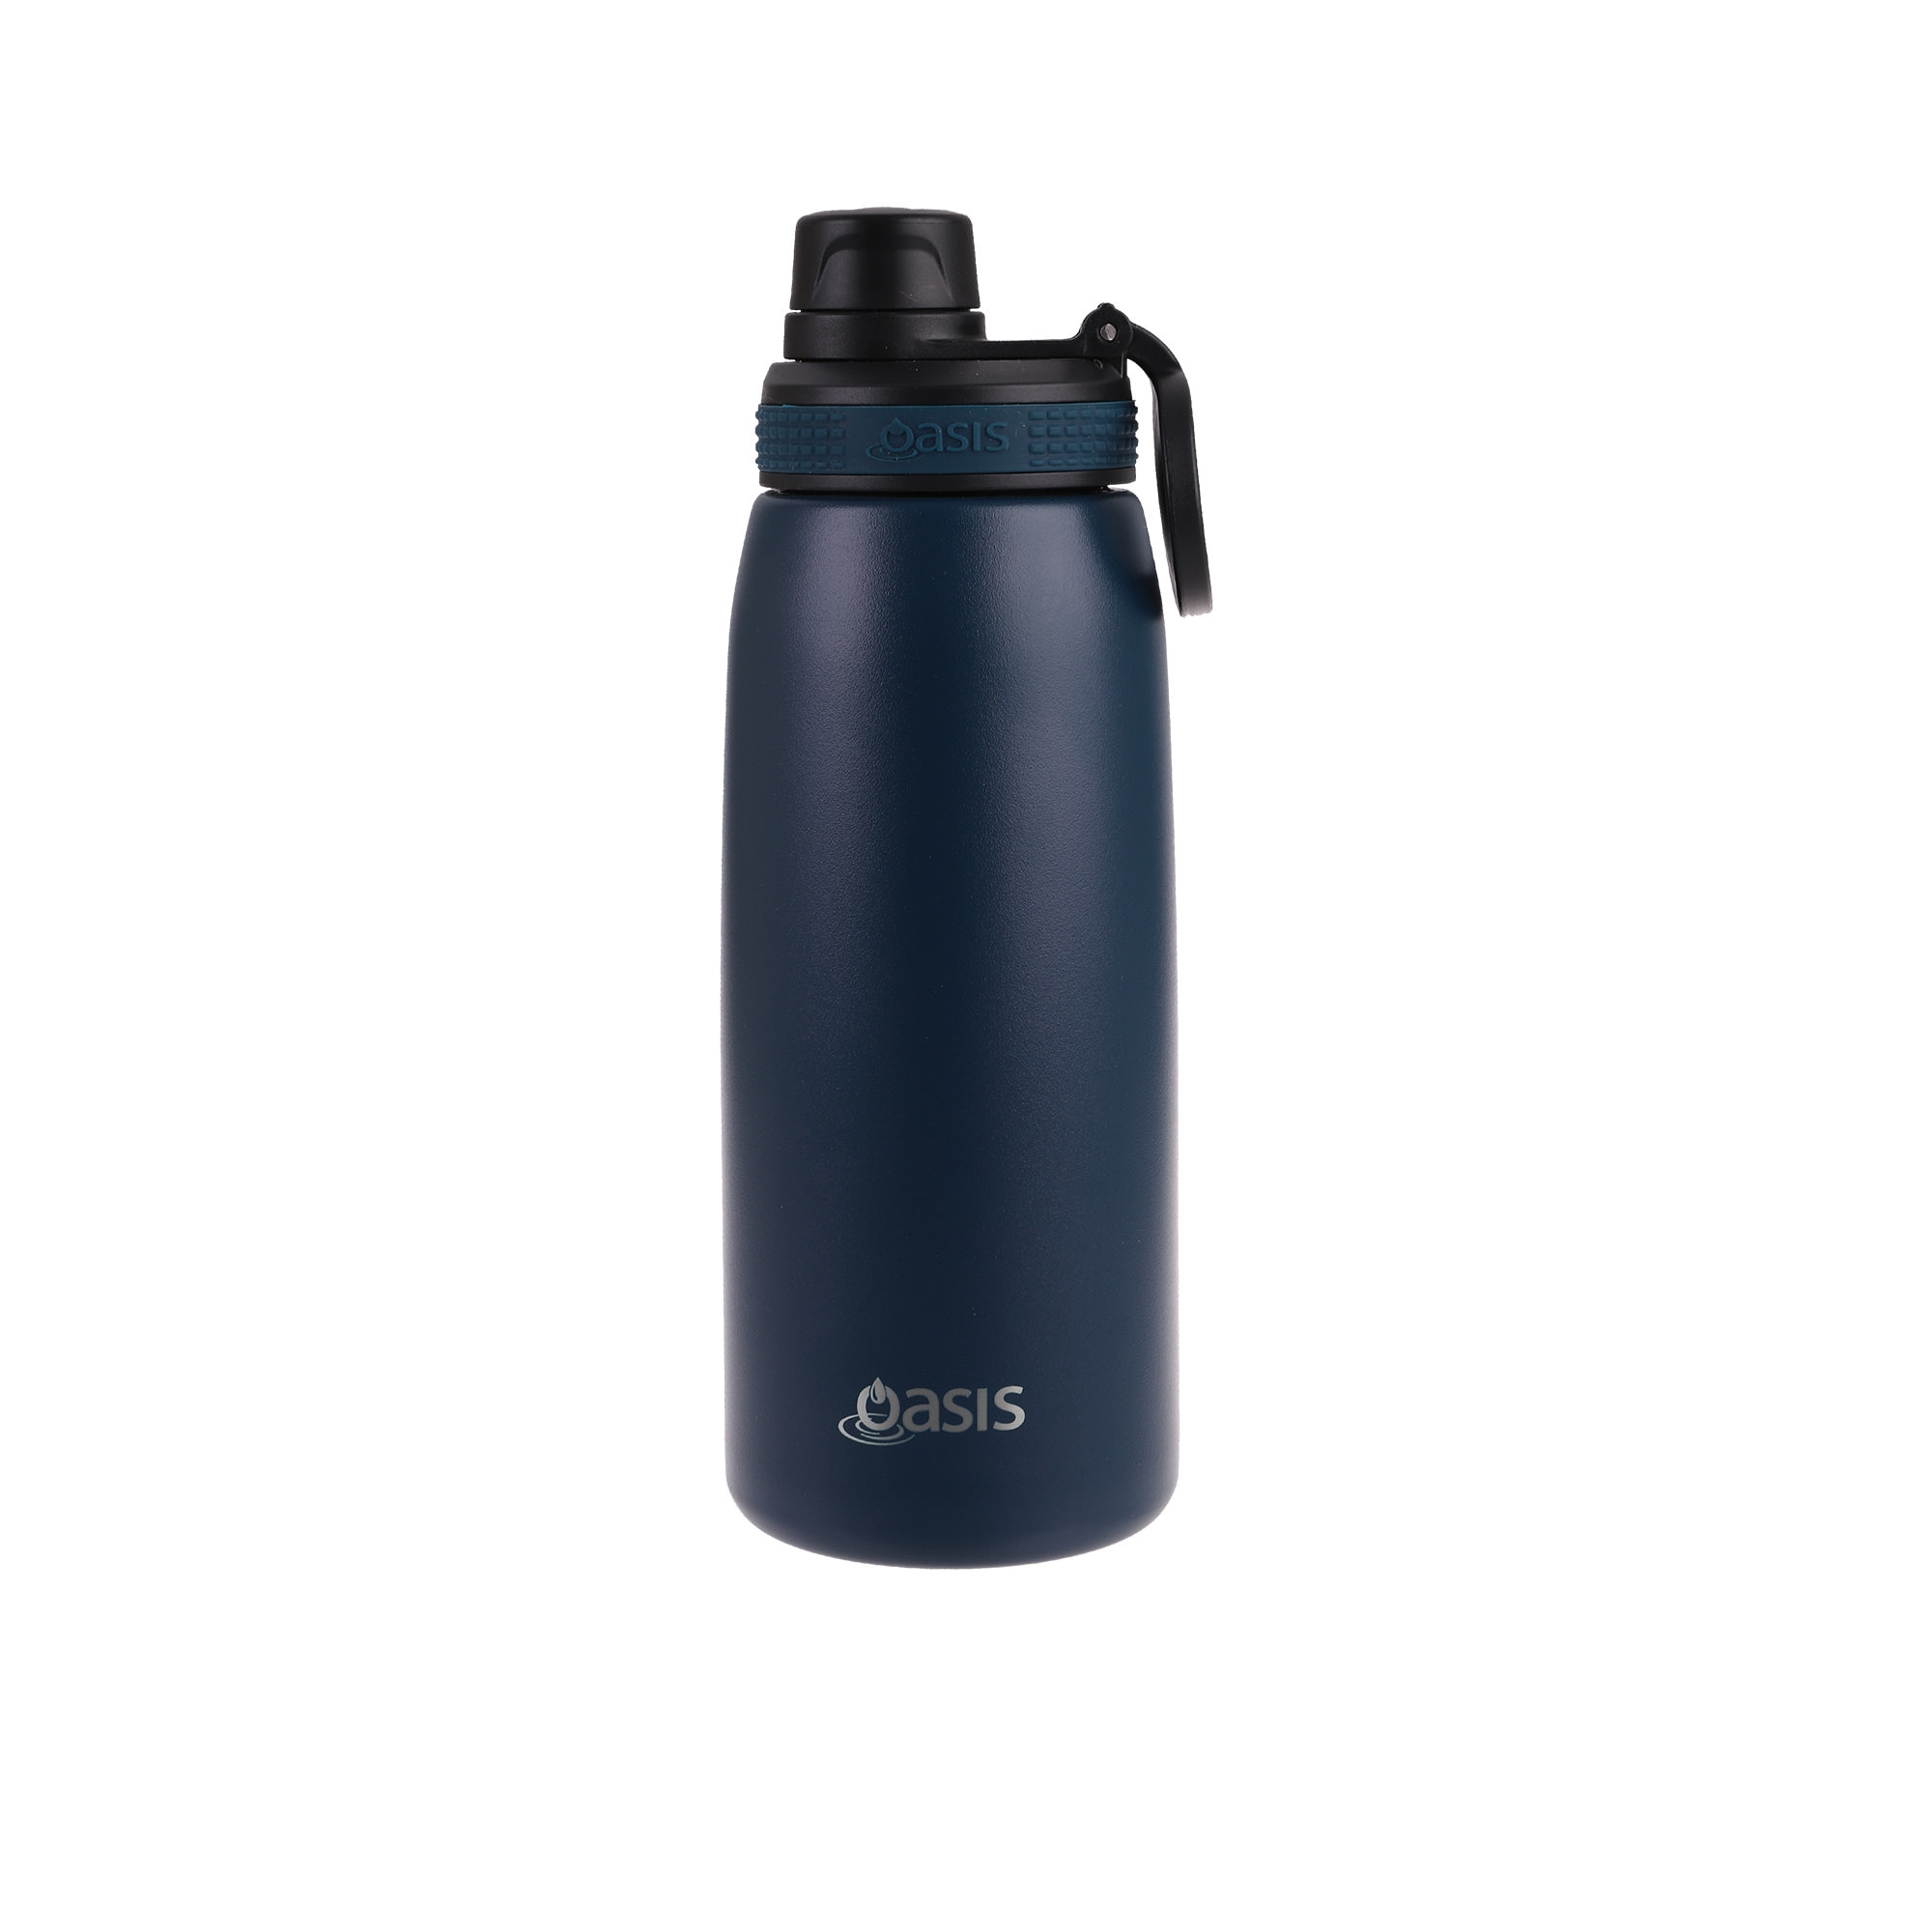 Oasis Double Wall Insulated Sports Bottle 780ml Navy Image 1